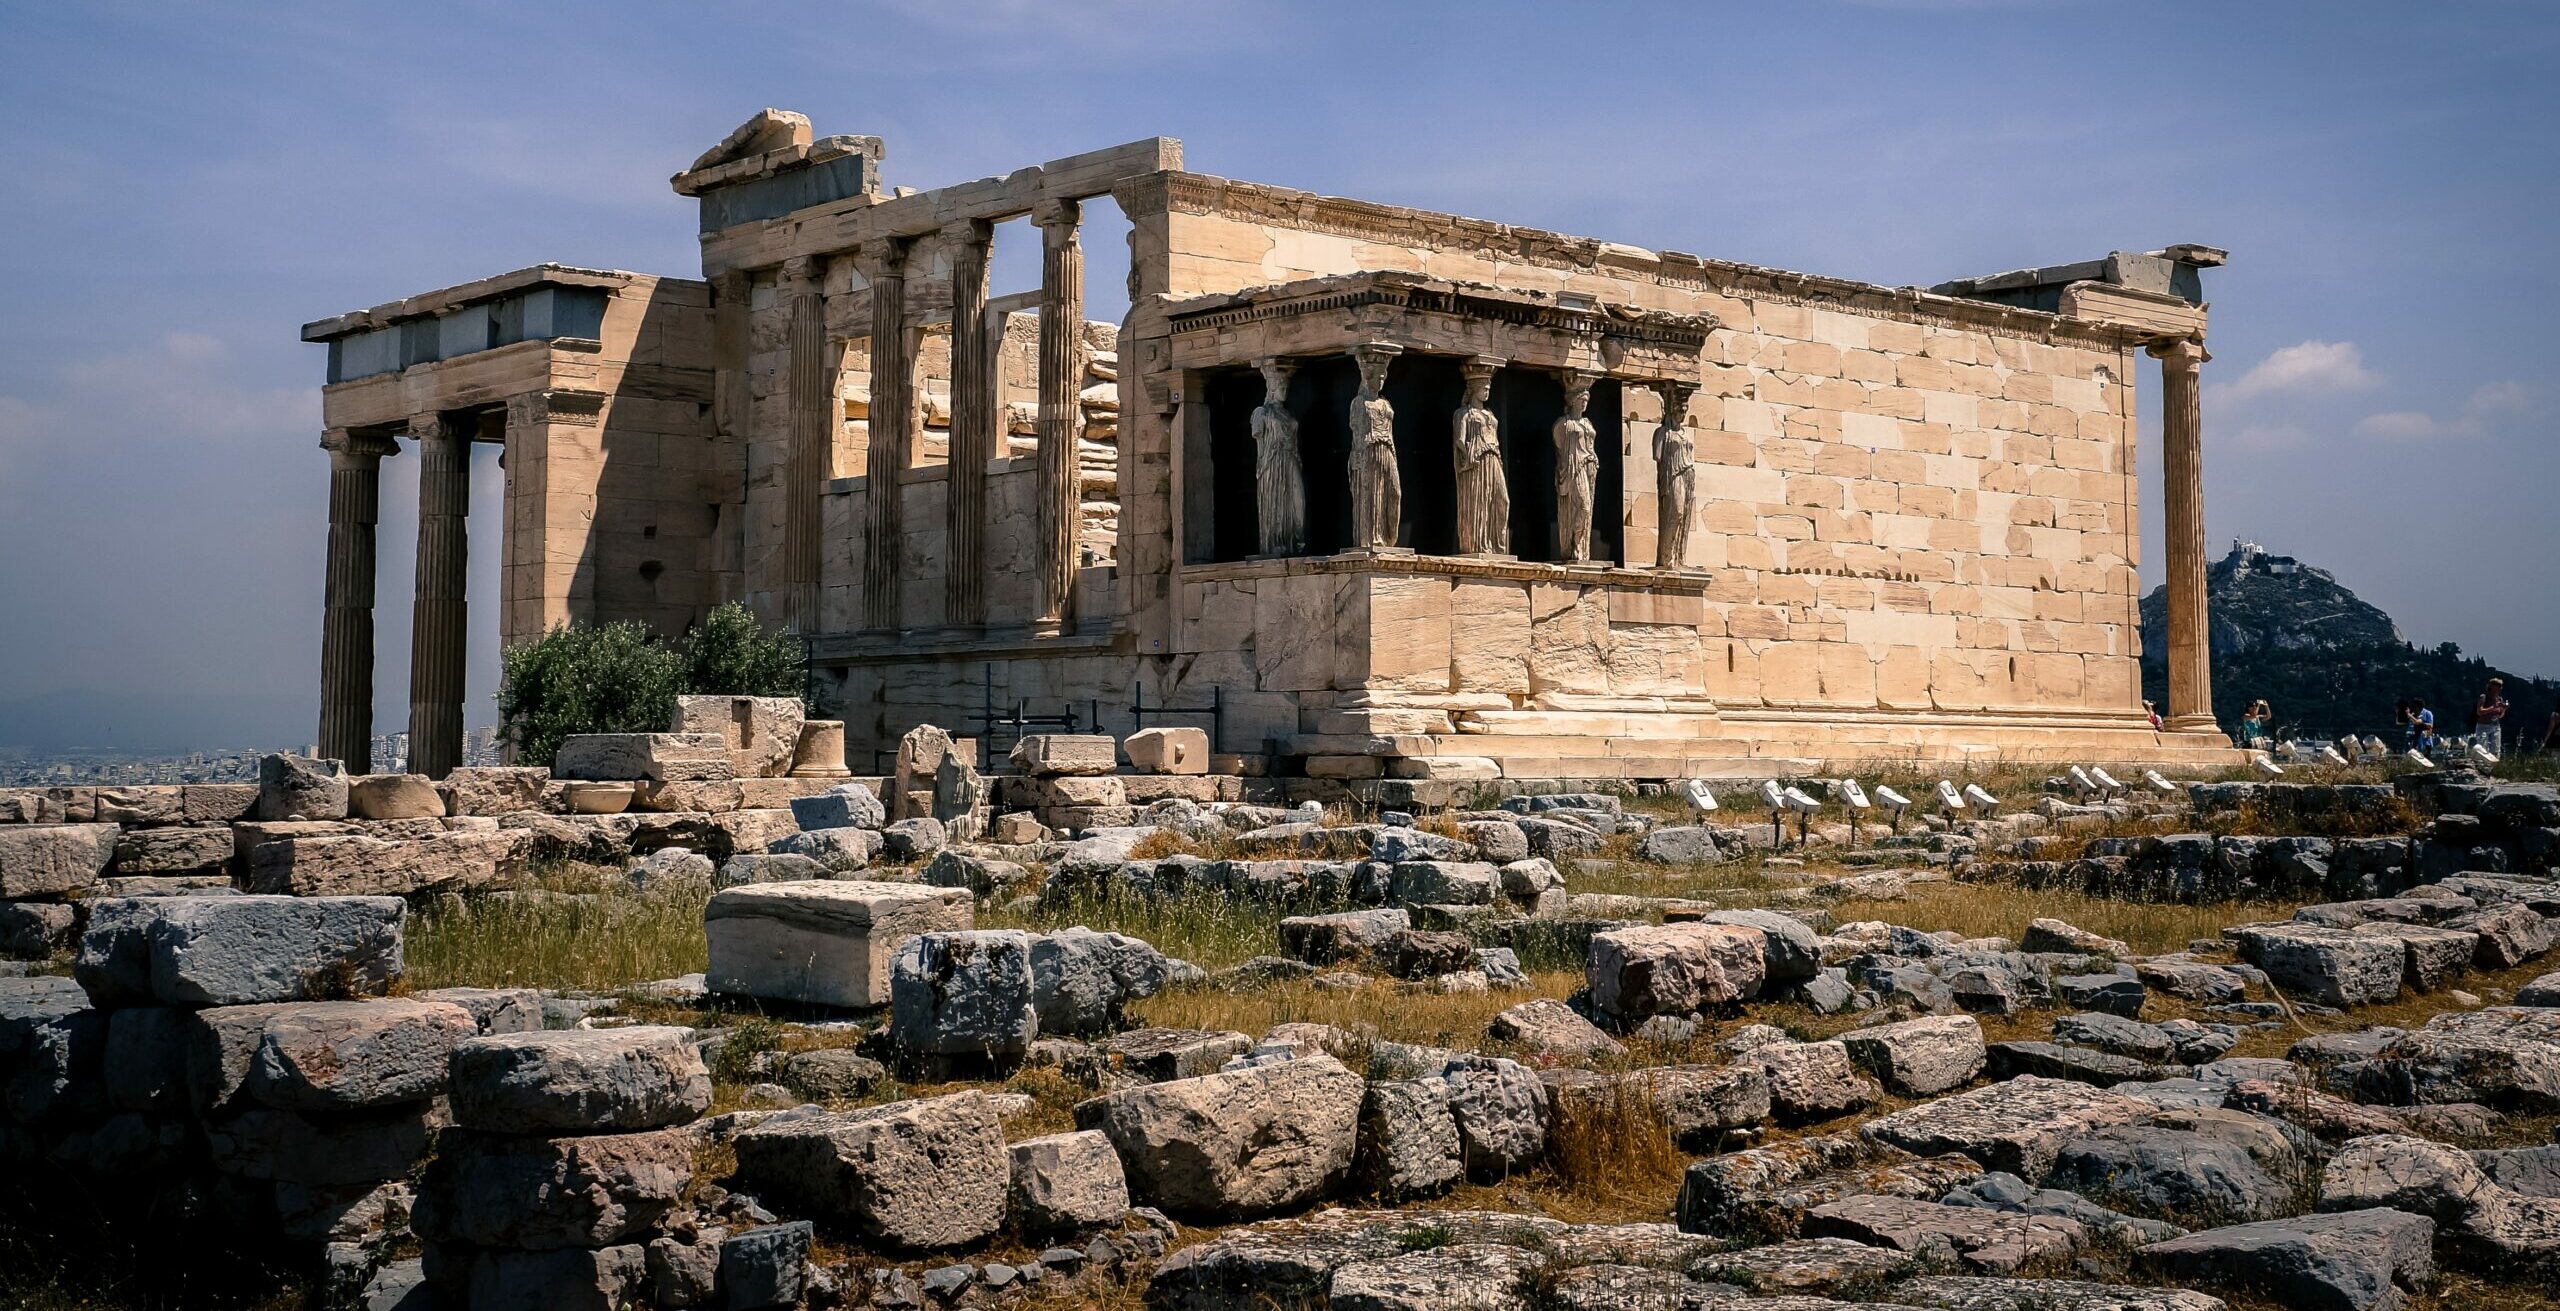 Athens: find one of the listed “coolest” cities on the planet